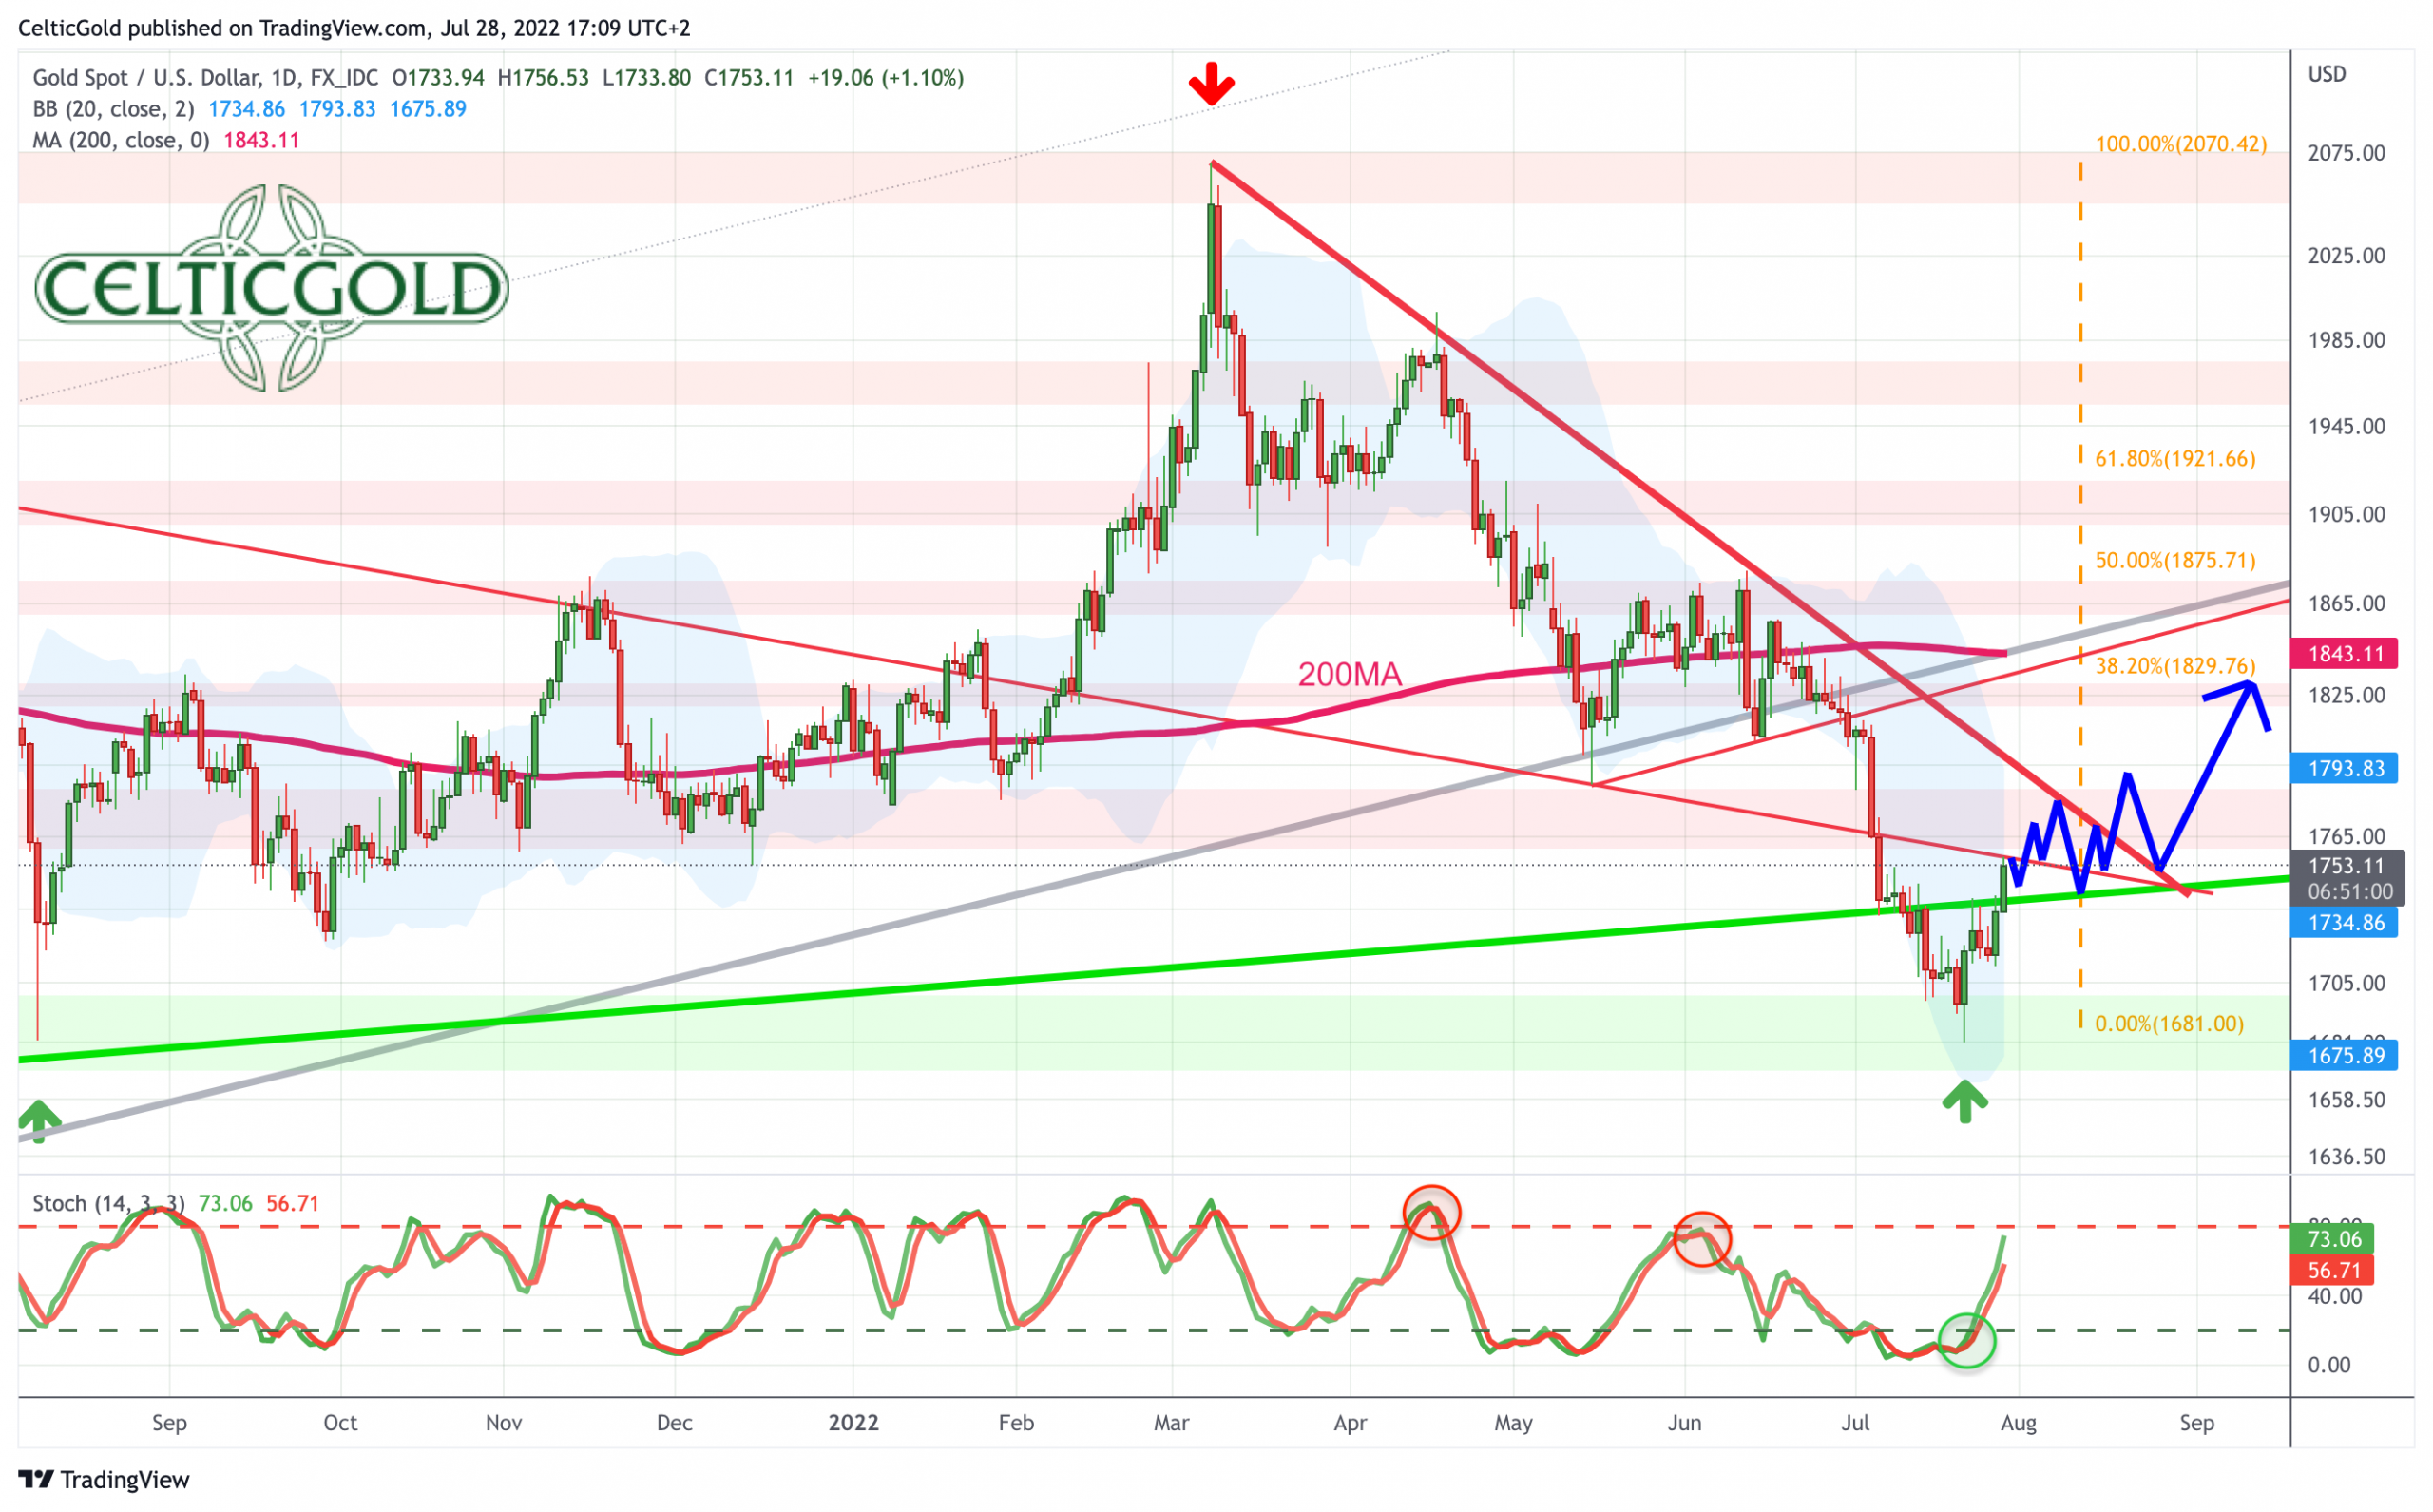 Gold in US-Dollars, daily chart as of July 27th, 2022. Source: Tradingview. July 28th, 2022: Gold – Summer rally has started.